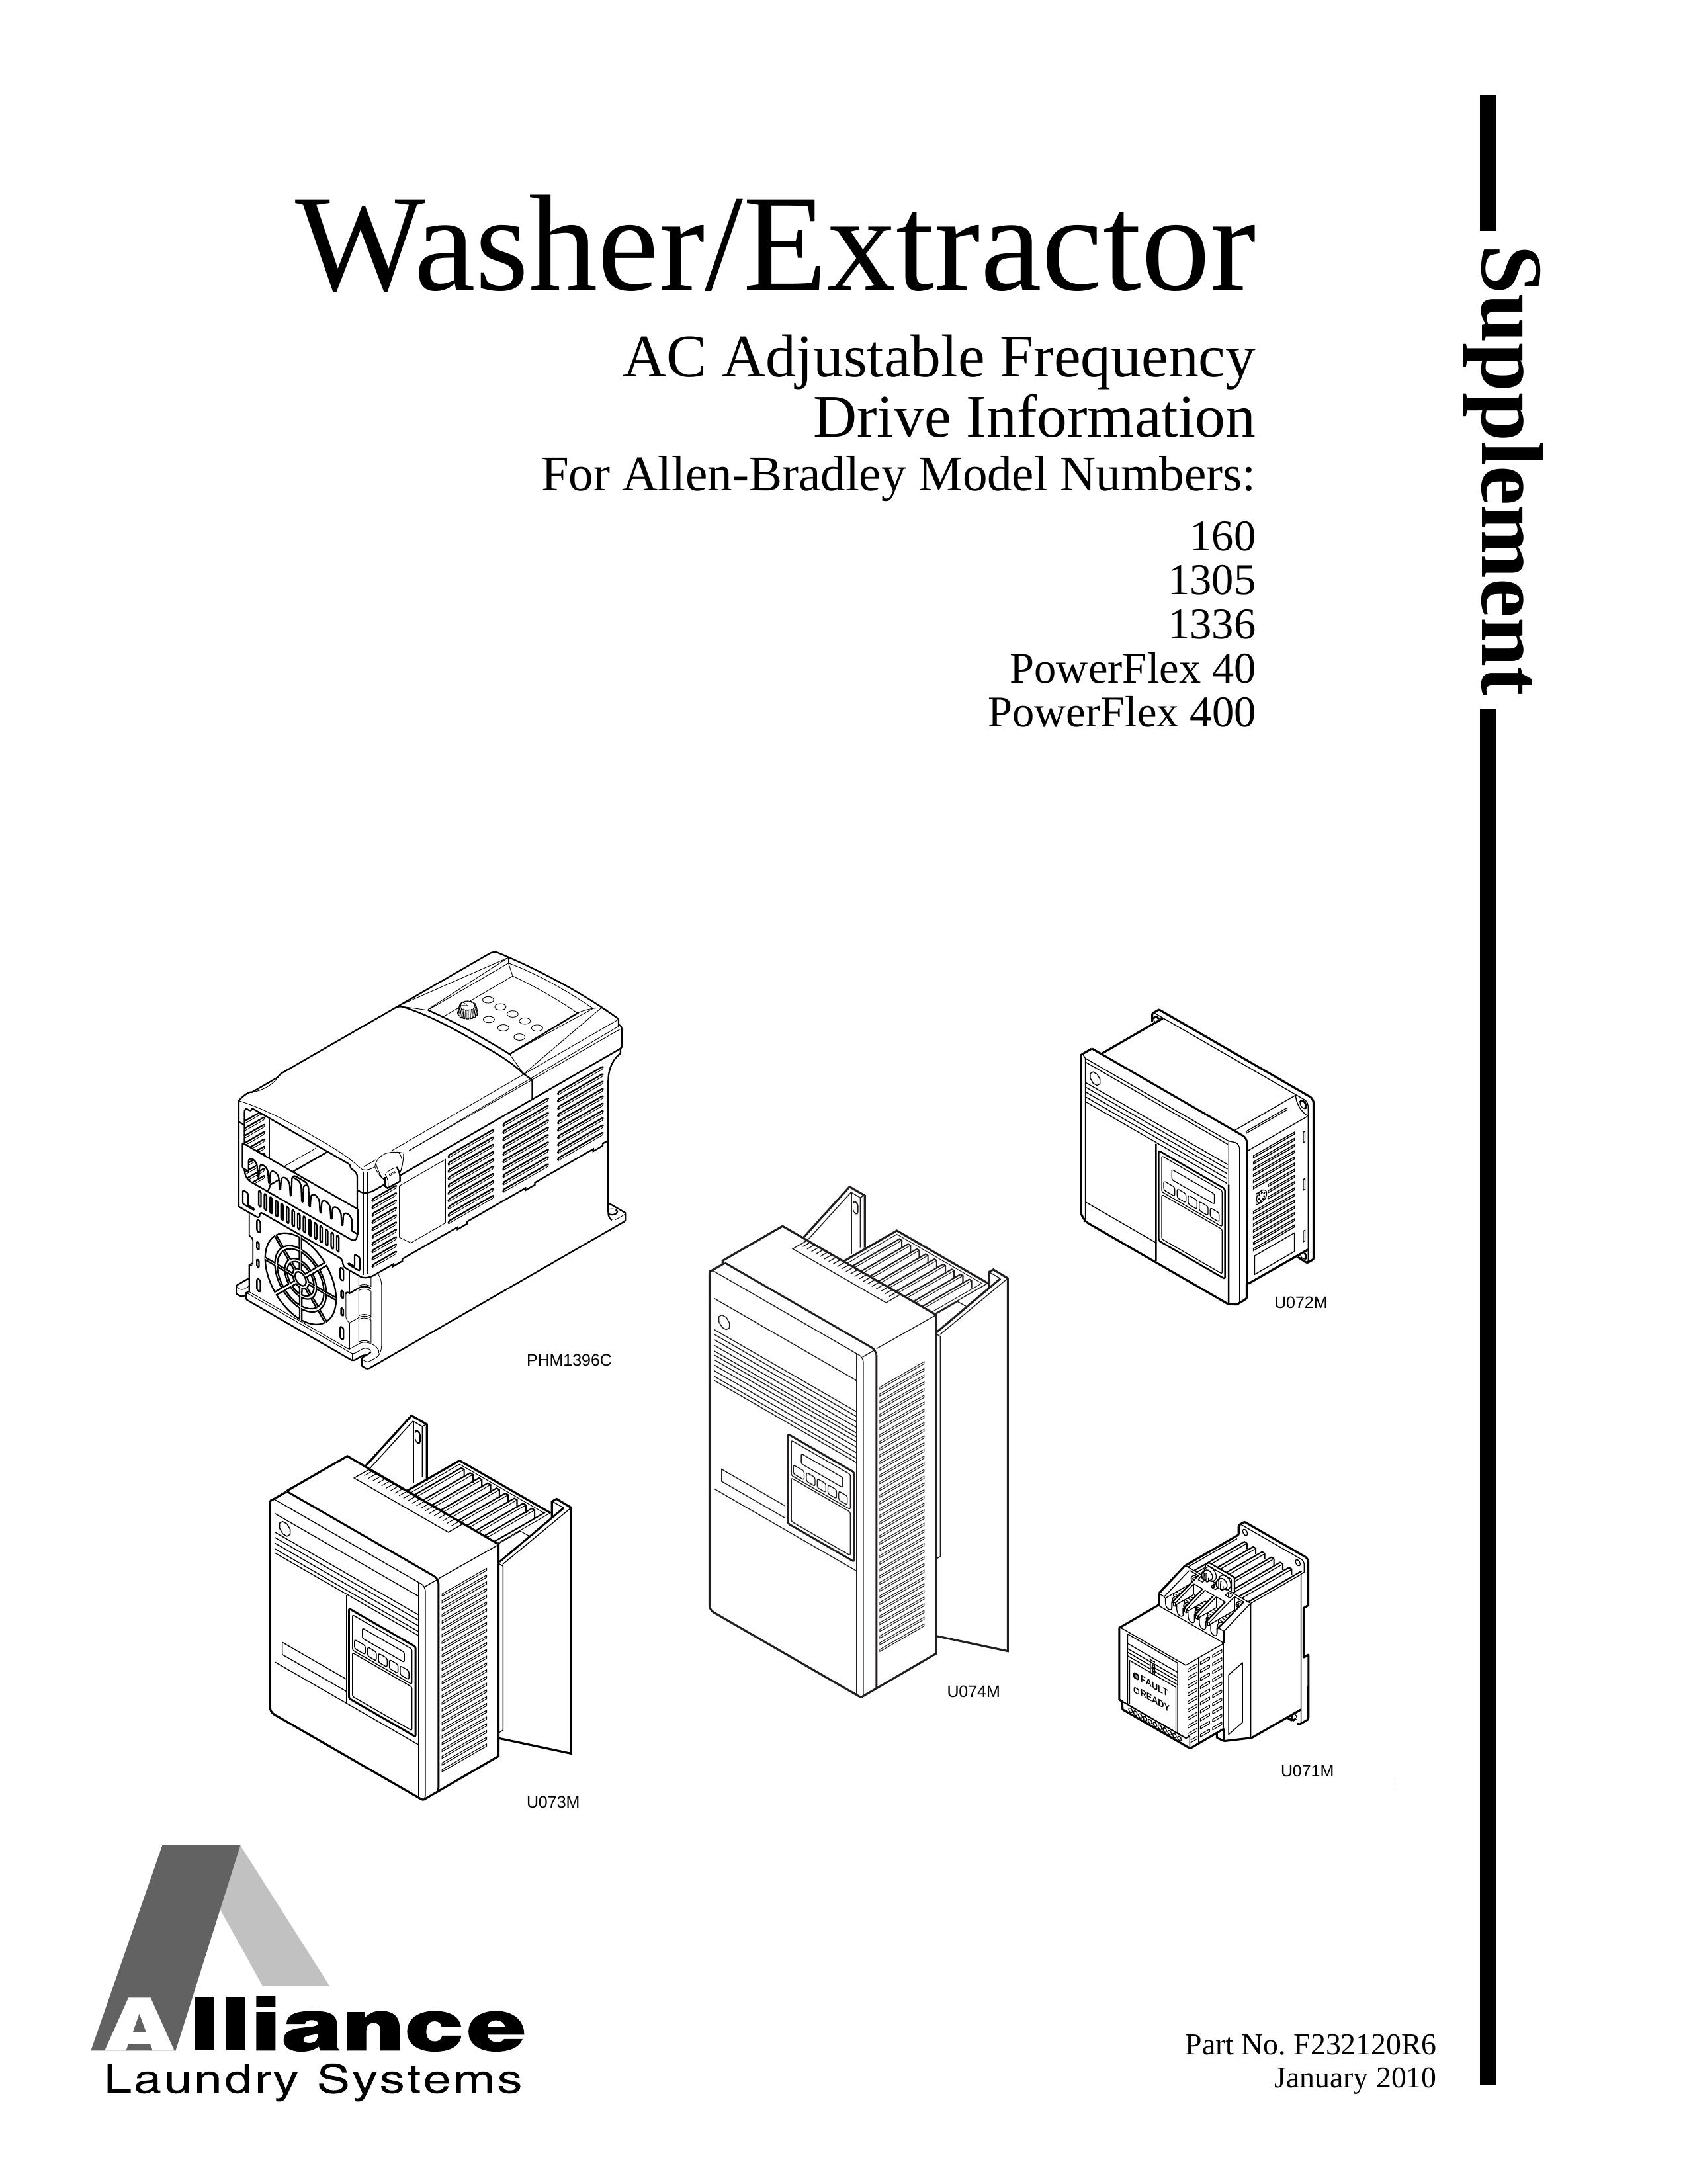 Alliance Laundry Systems 1336 Washer User Manual